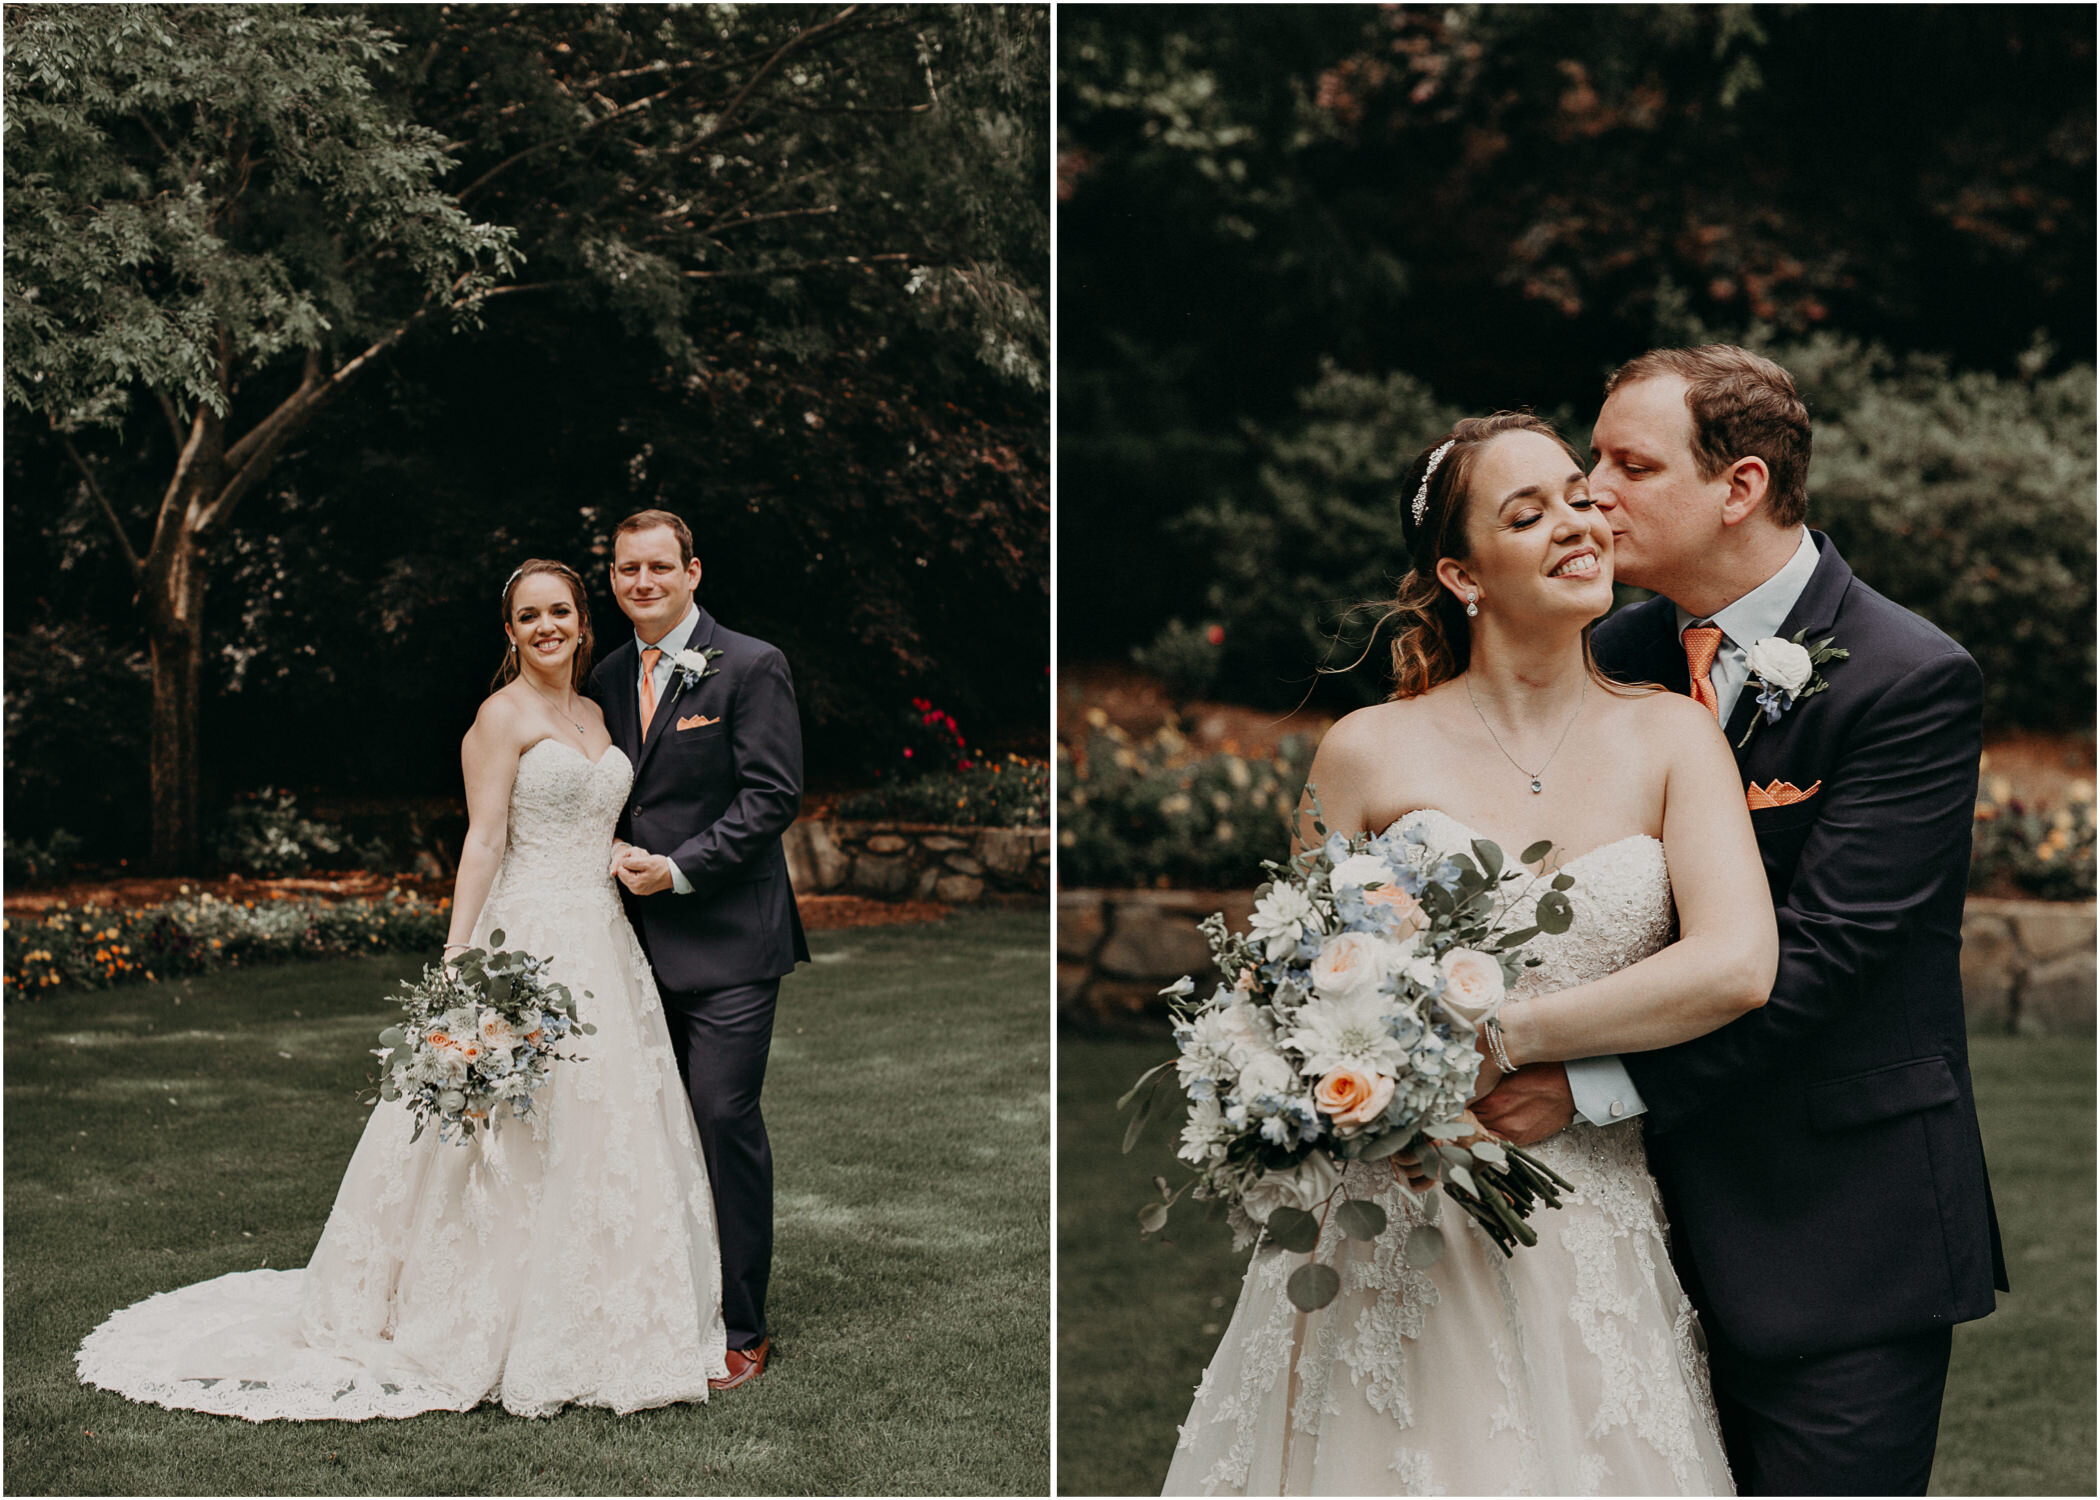 Christa & Ben's Wedding Day || Atlanta Spring Wedding at The Country Club of The South29.jpg